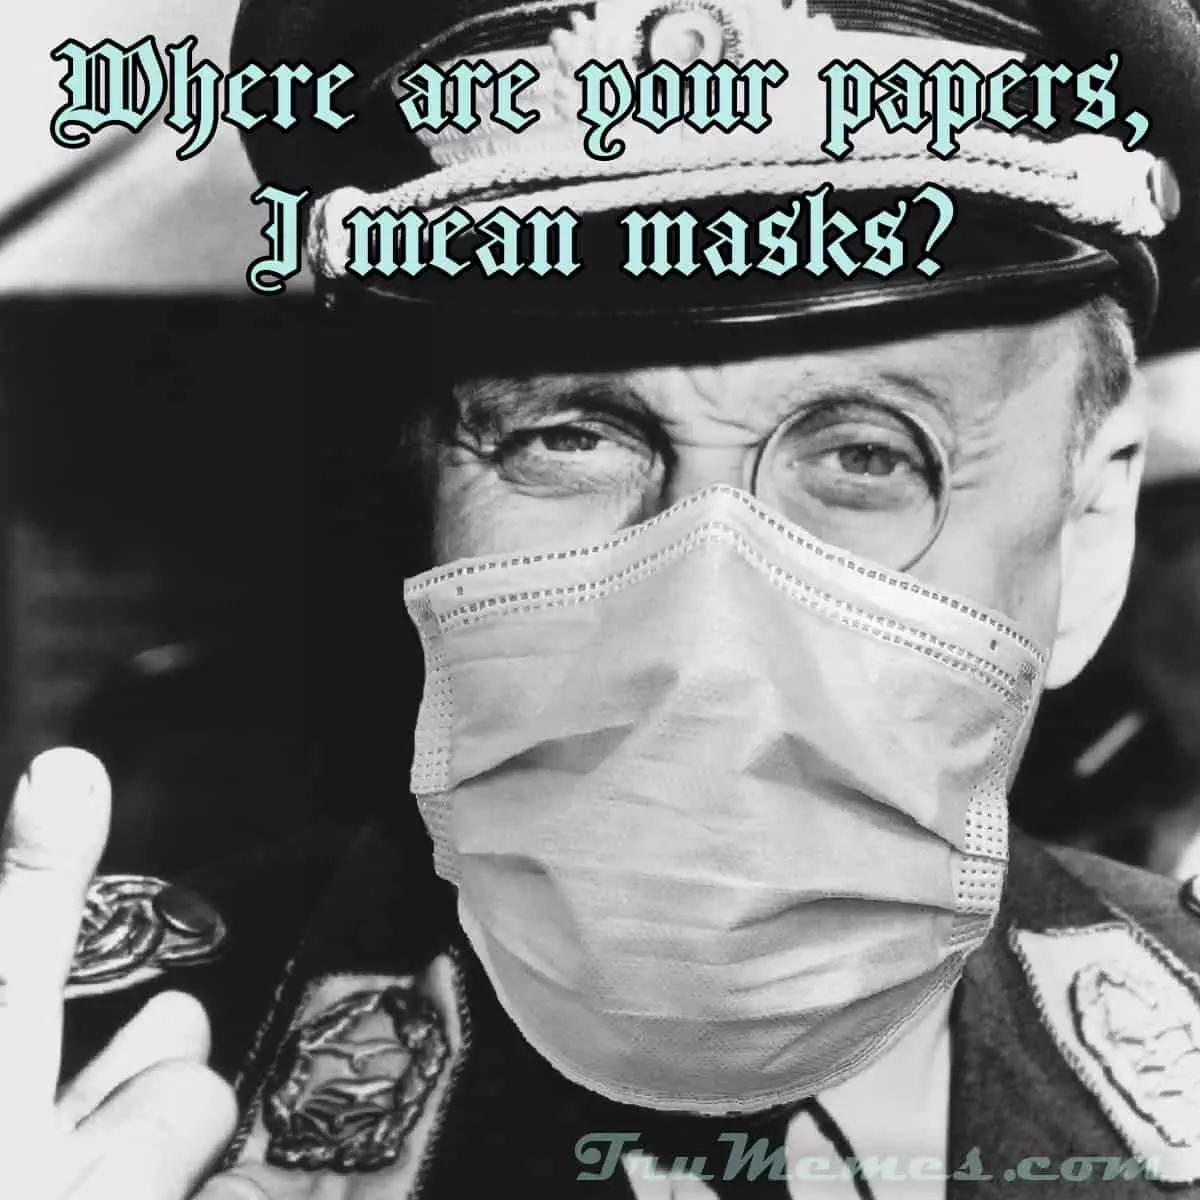 Where are your papers, I mean masks!